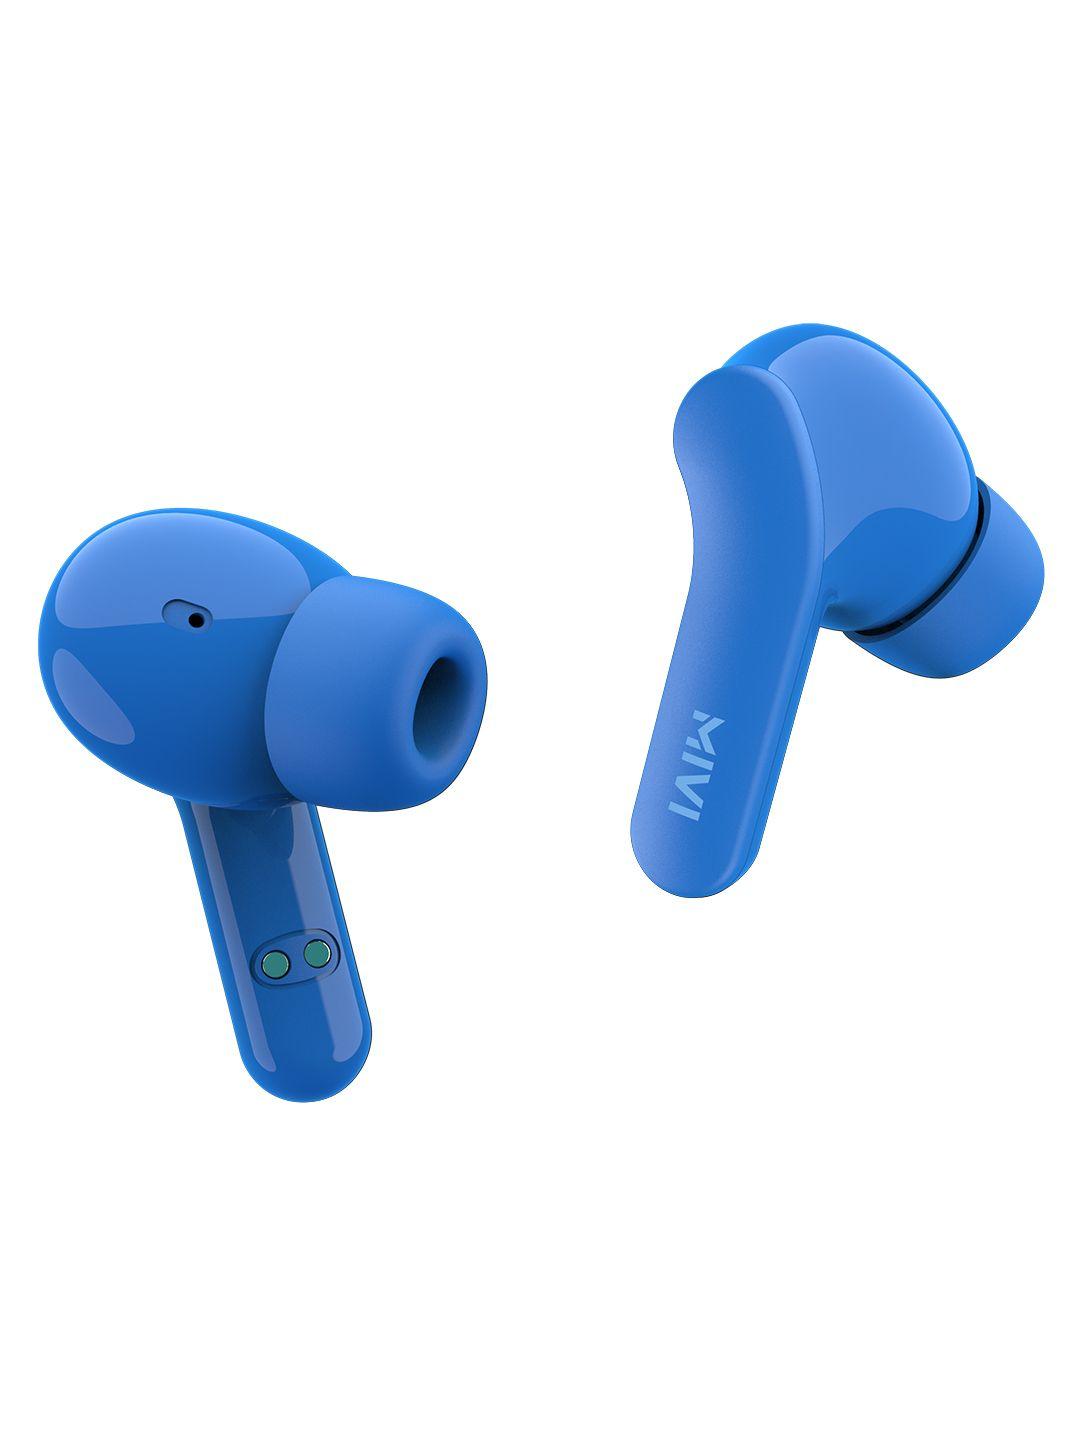 mivi duopods a25 true wireless earbuds with 30hours battery - midnight blue